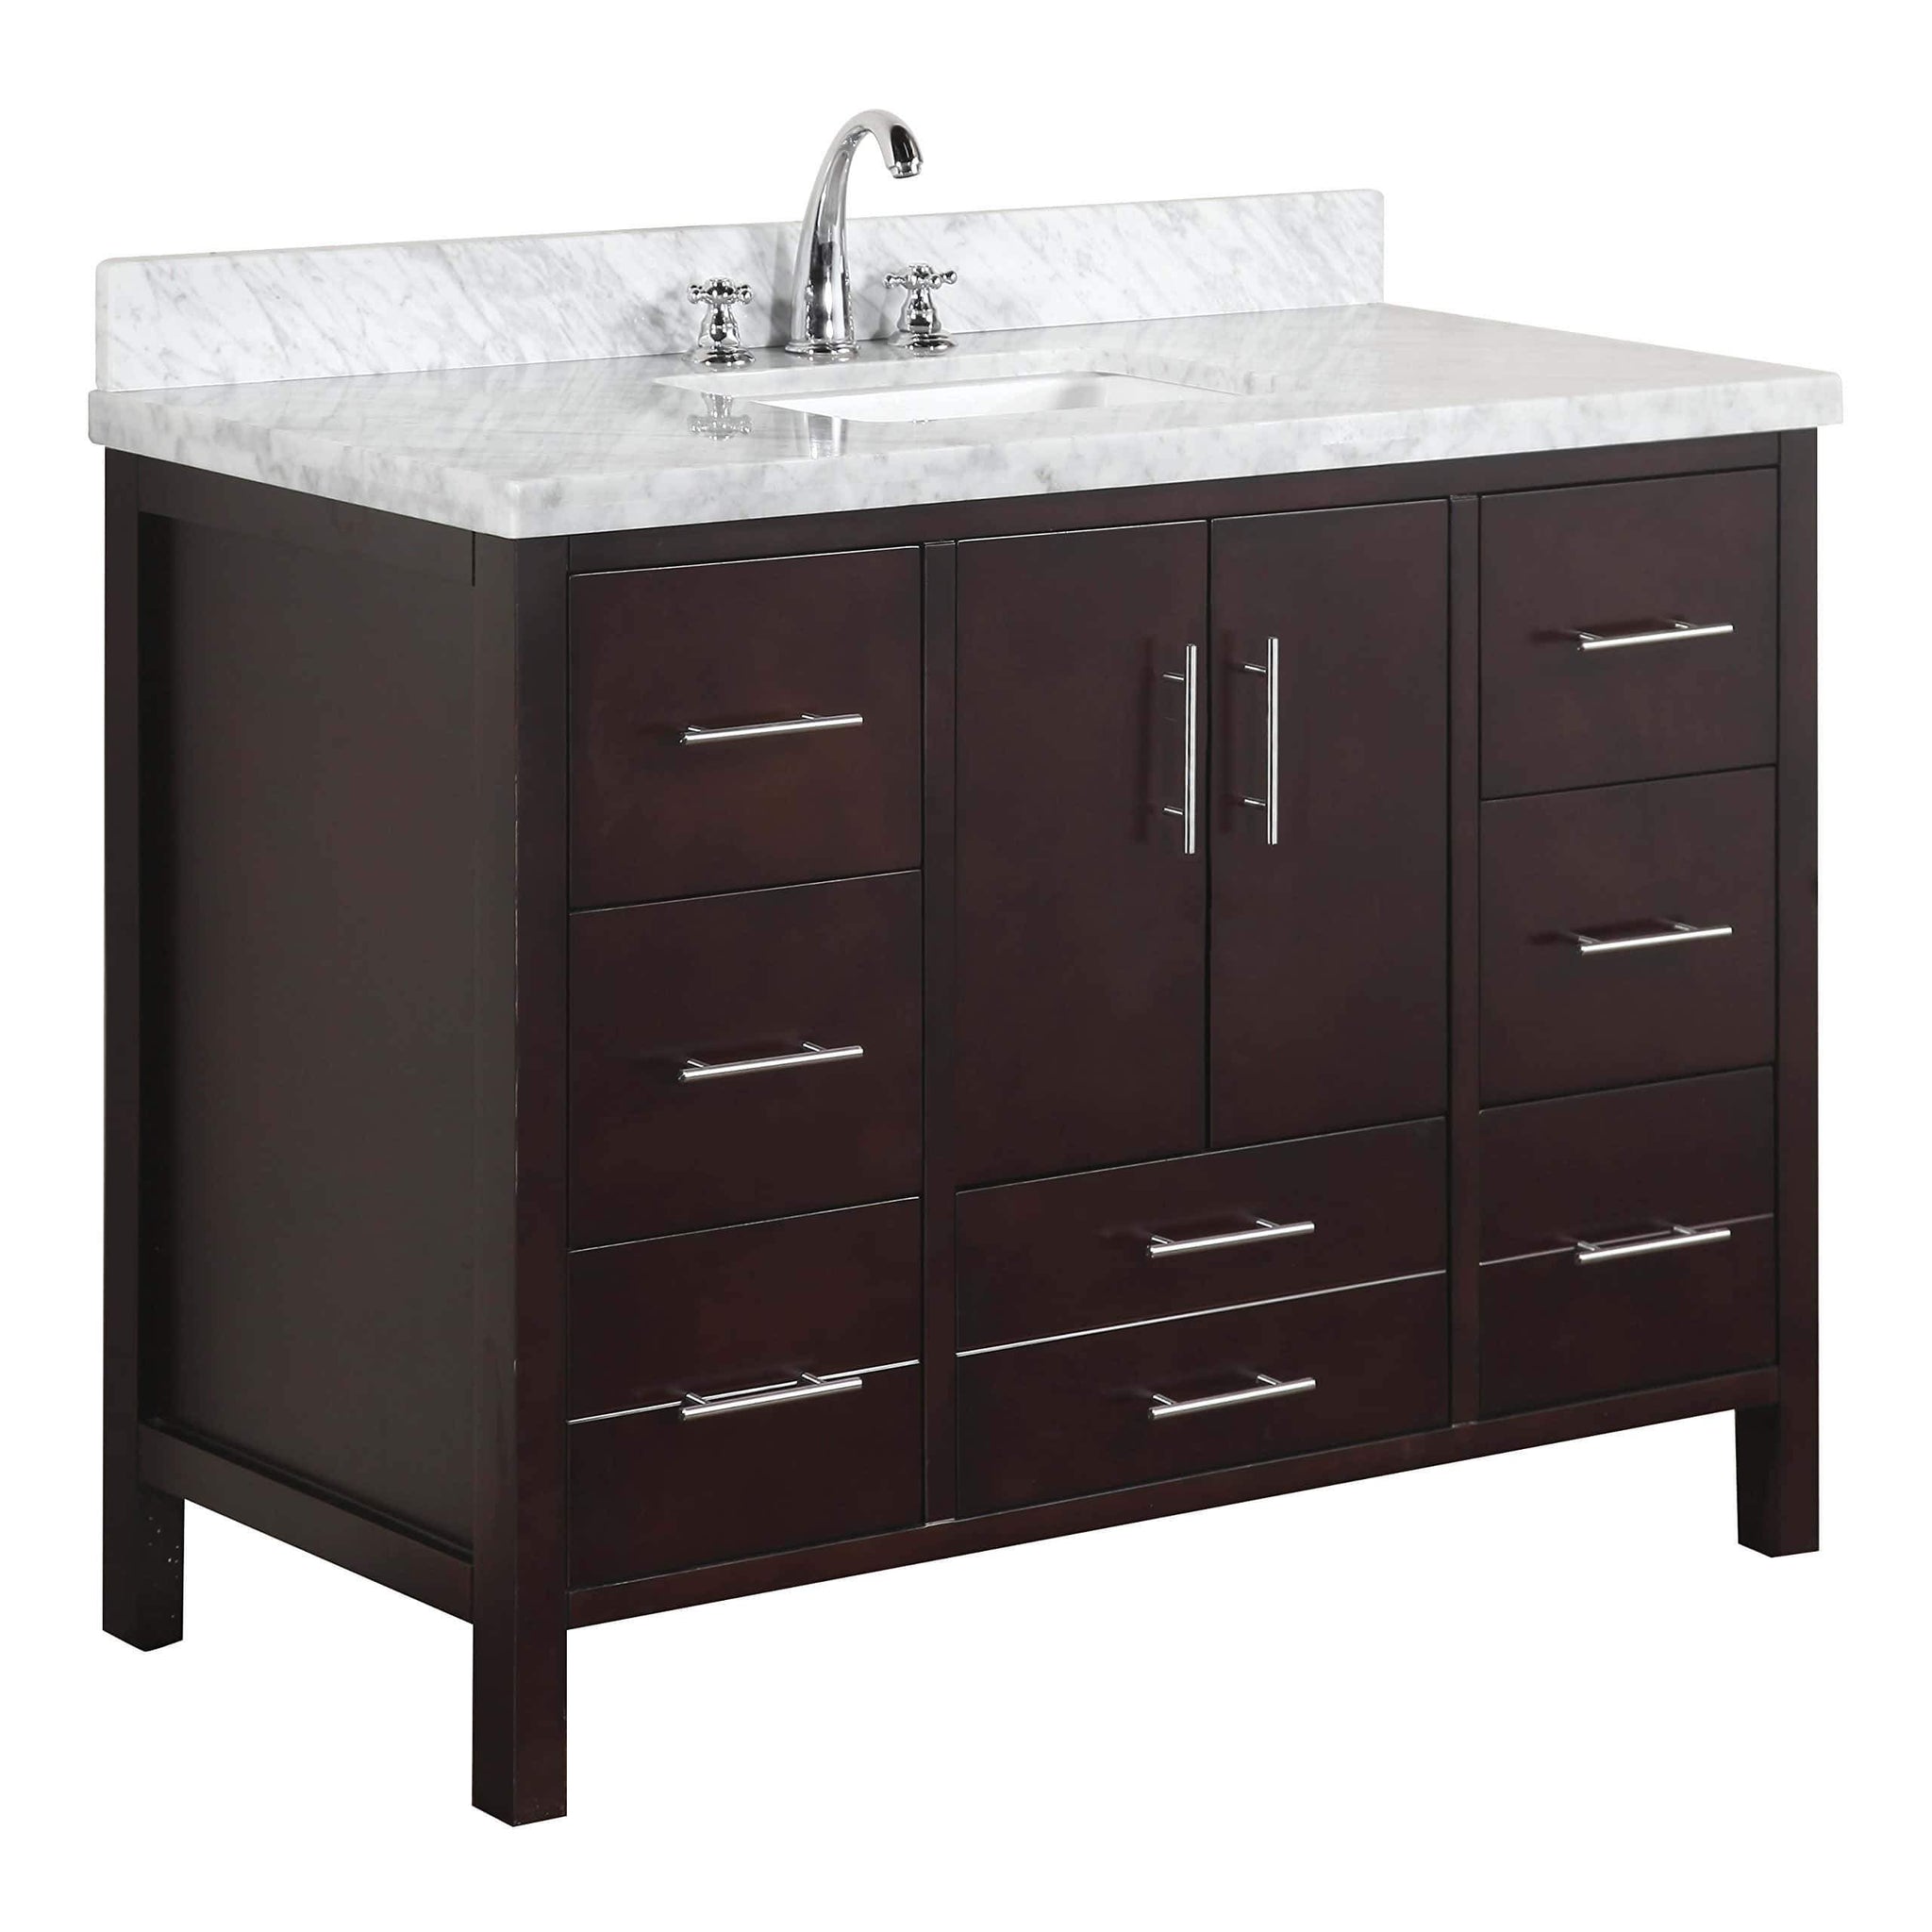 Order now kitchen bath collection kbc039brcarr california bathroom vanity with marble countertop cabinet with soft close function and undermount ceramic sink carrara chocolate 48